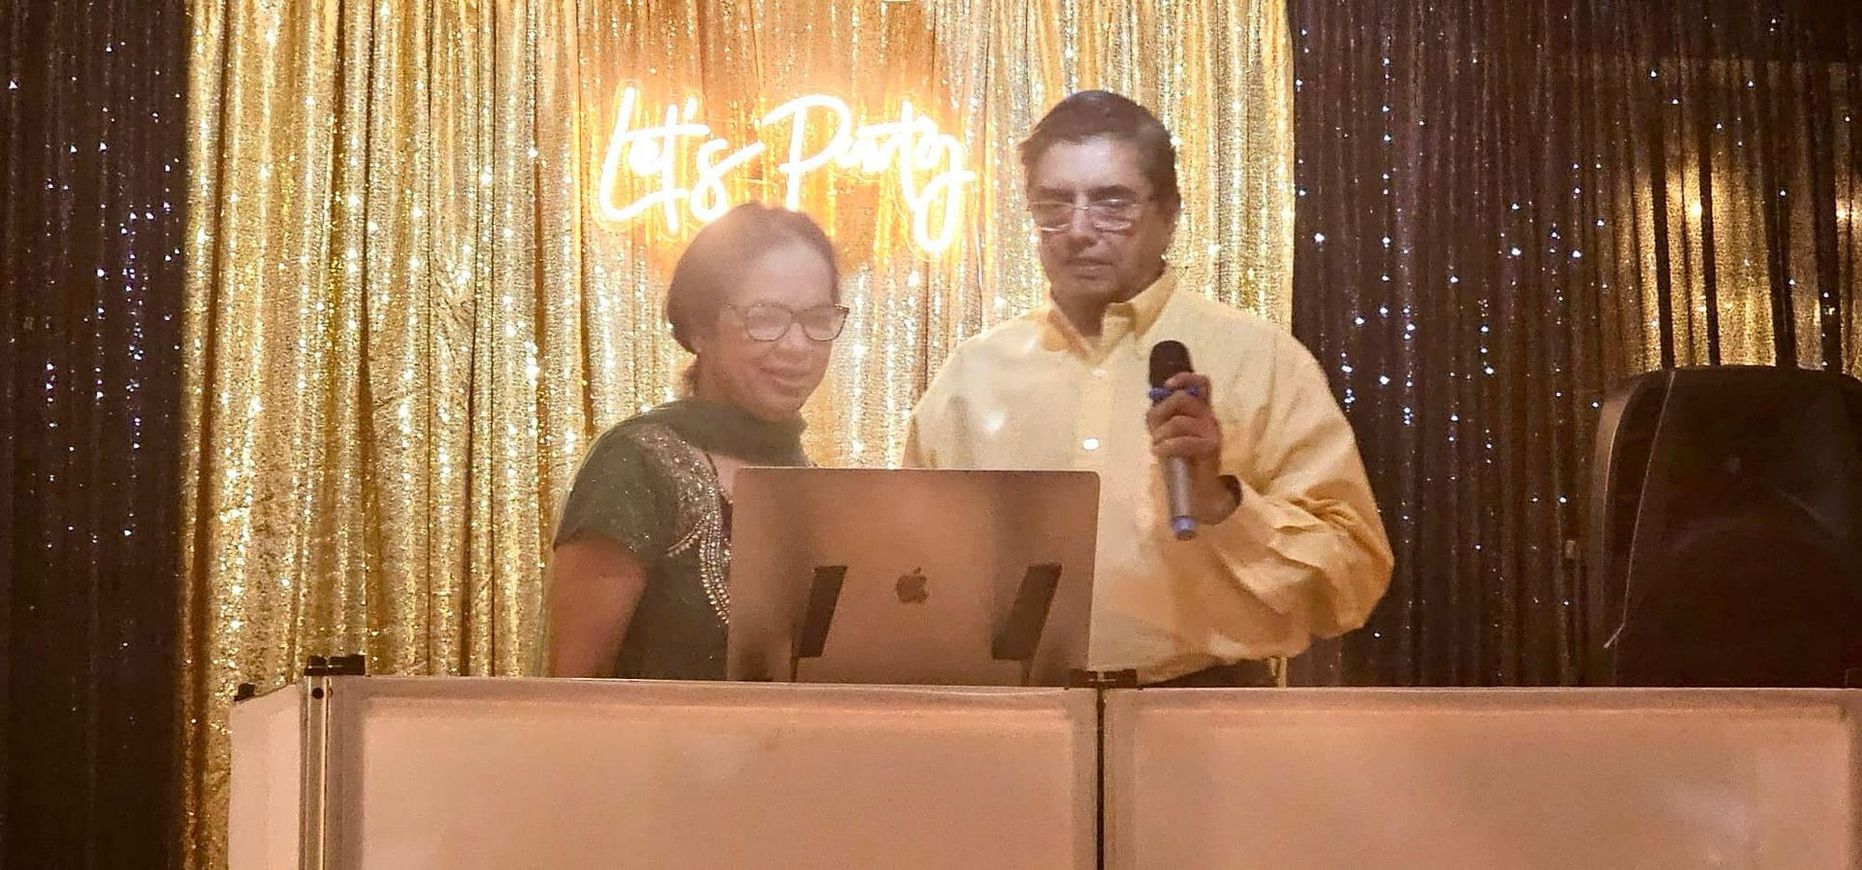 A man and a woman are standing in front of a laptop computer.